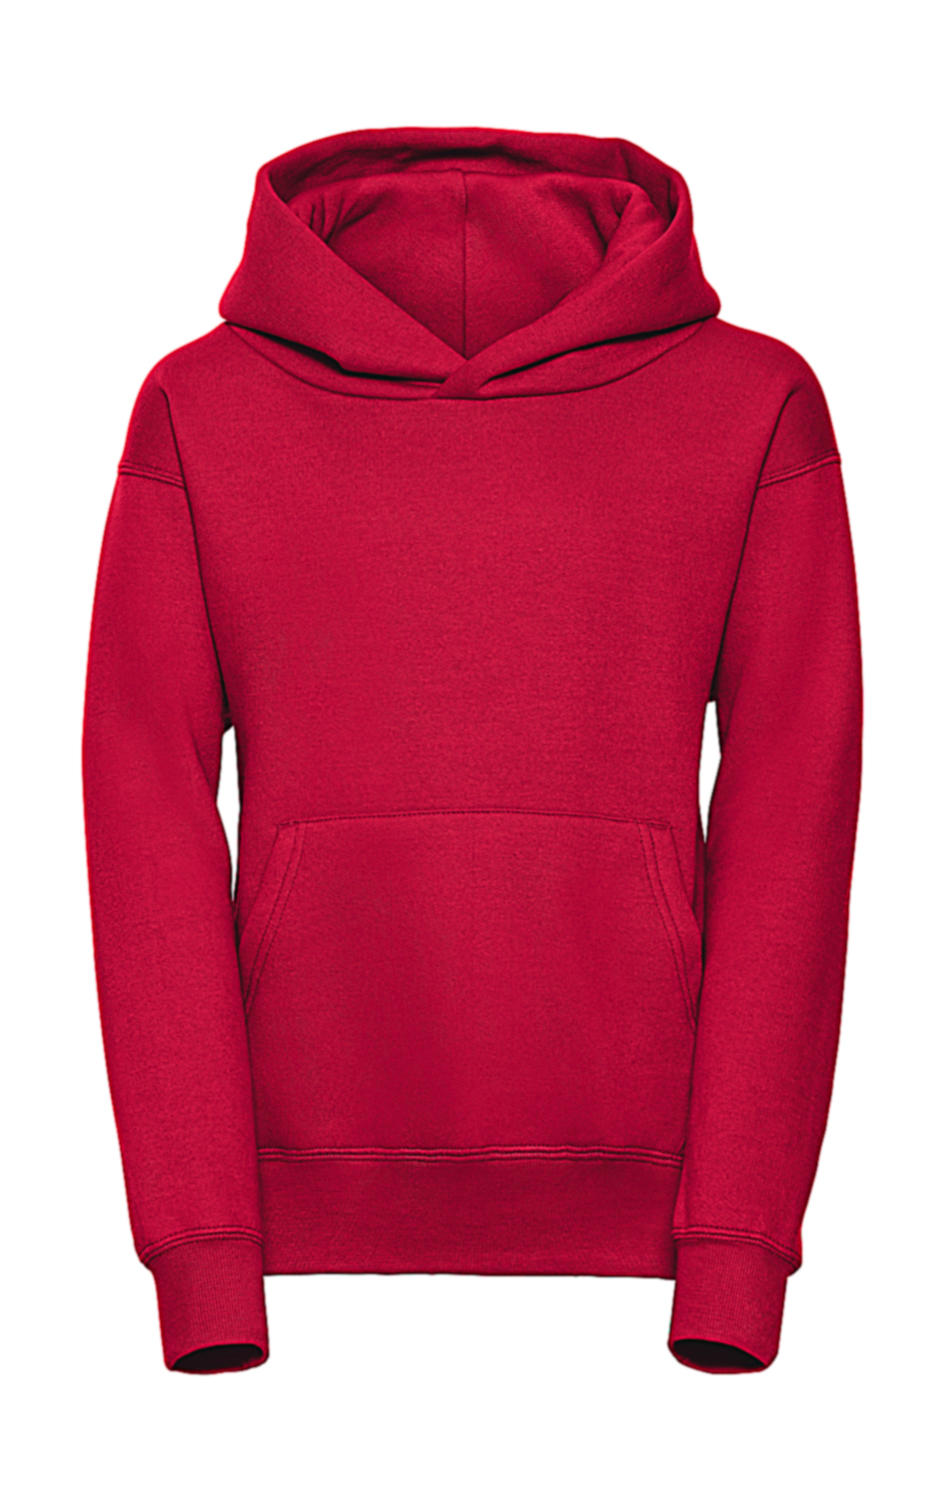  Kids Hooded Sweat in Farbe Classic Red